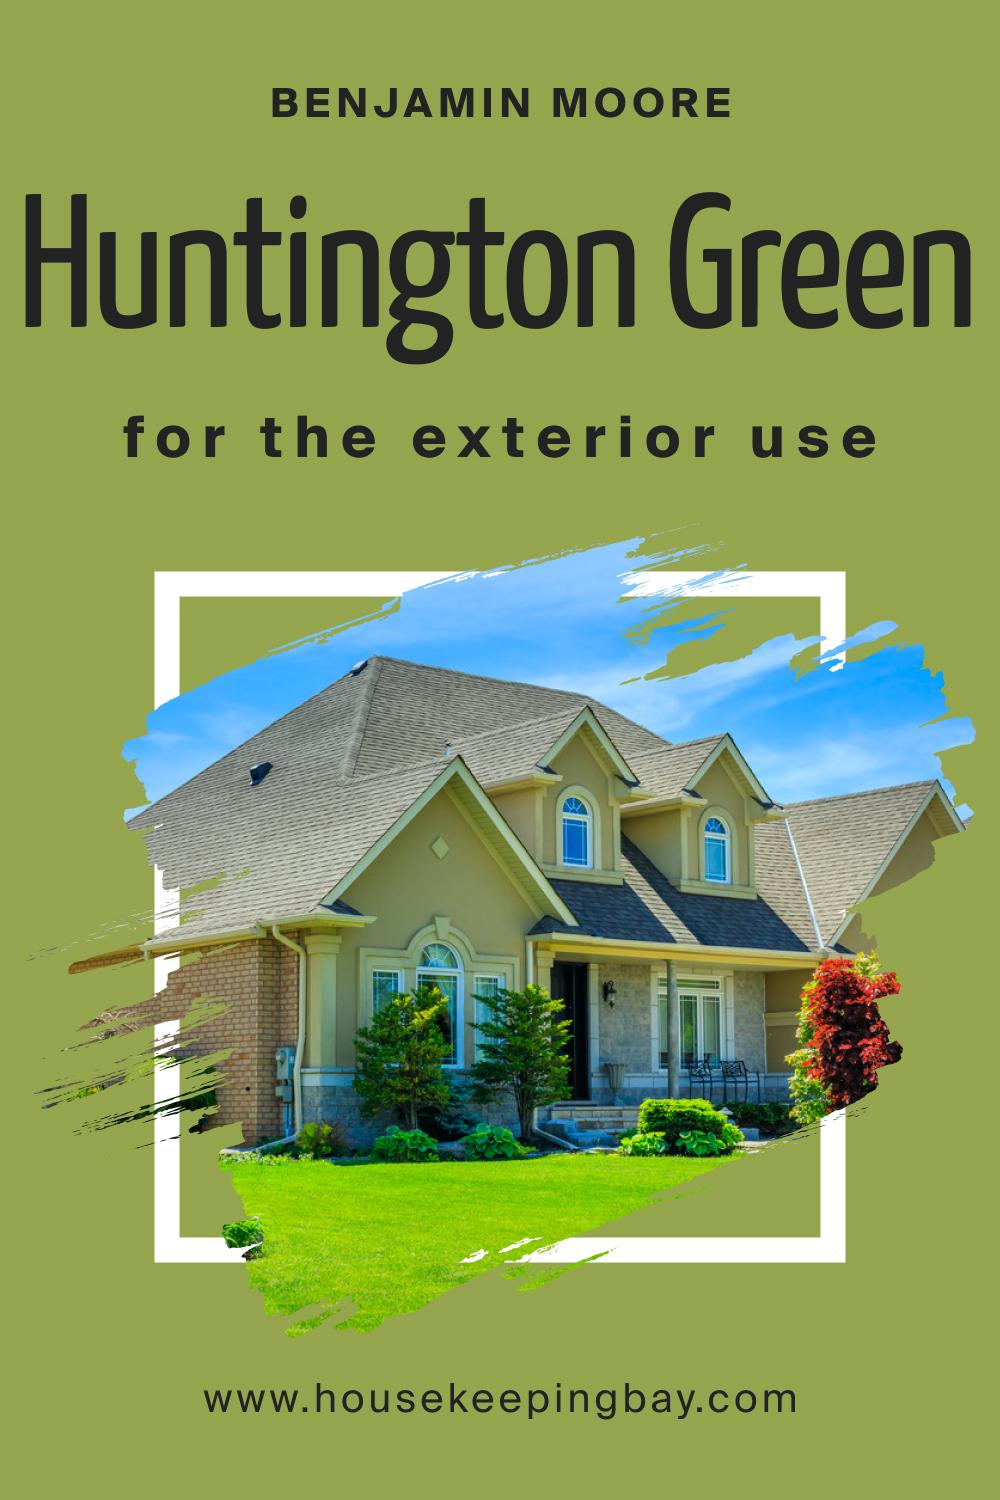 How to Use Huntington Green 406 for an Exterior?